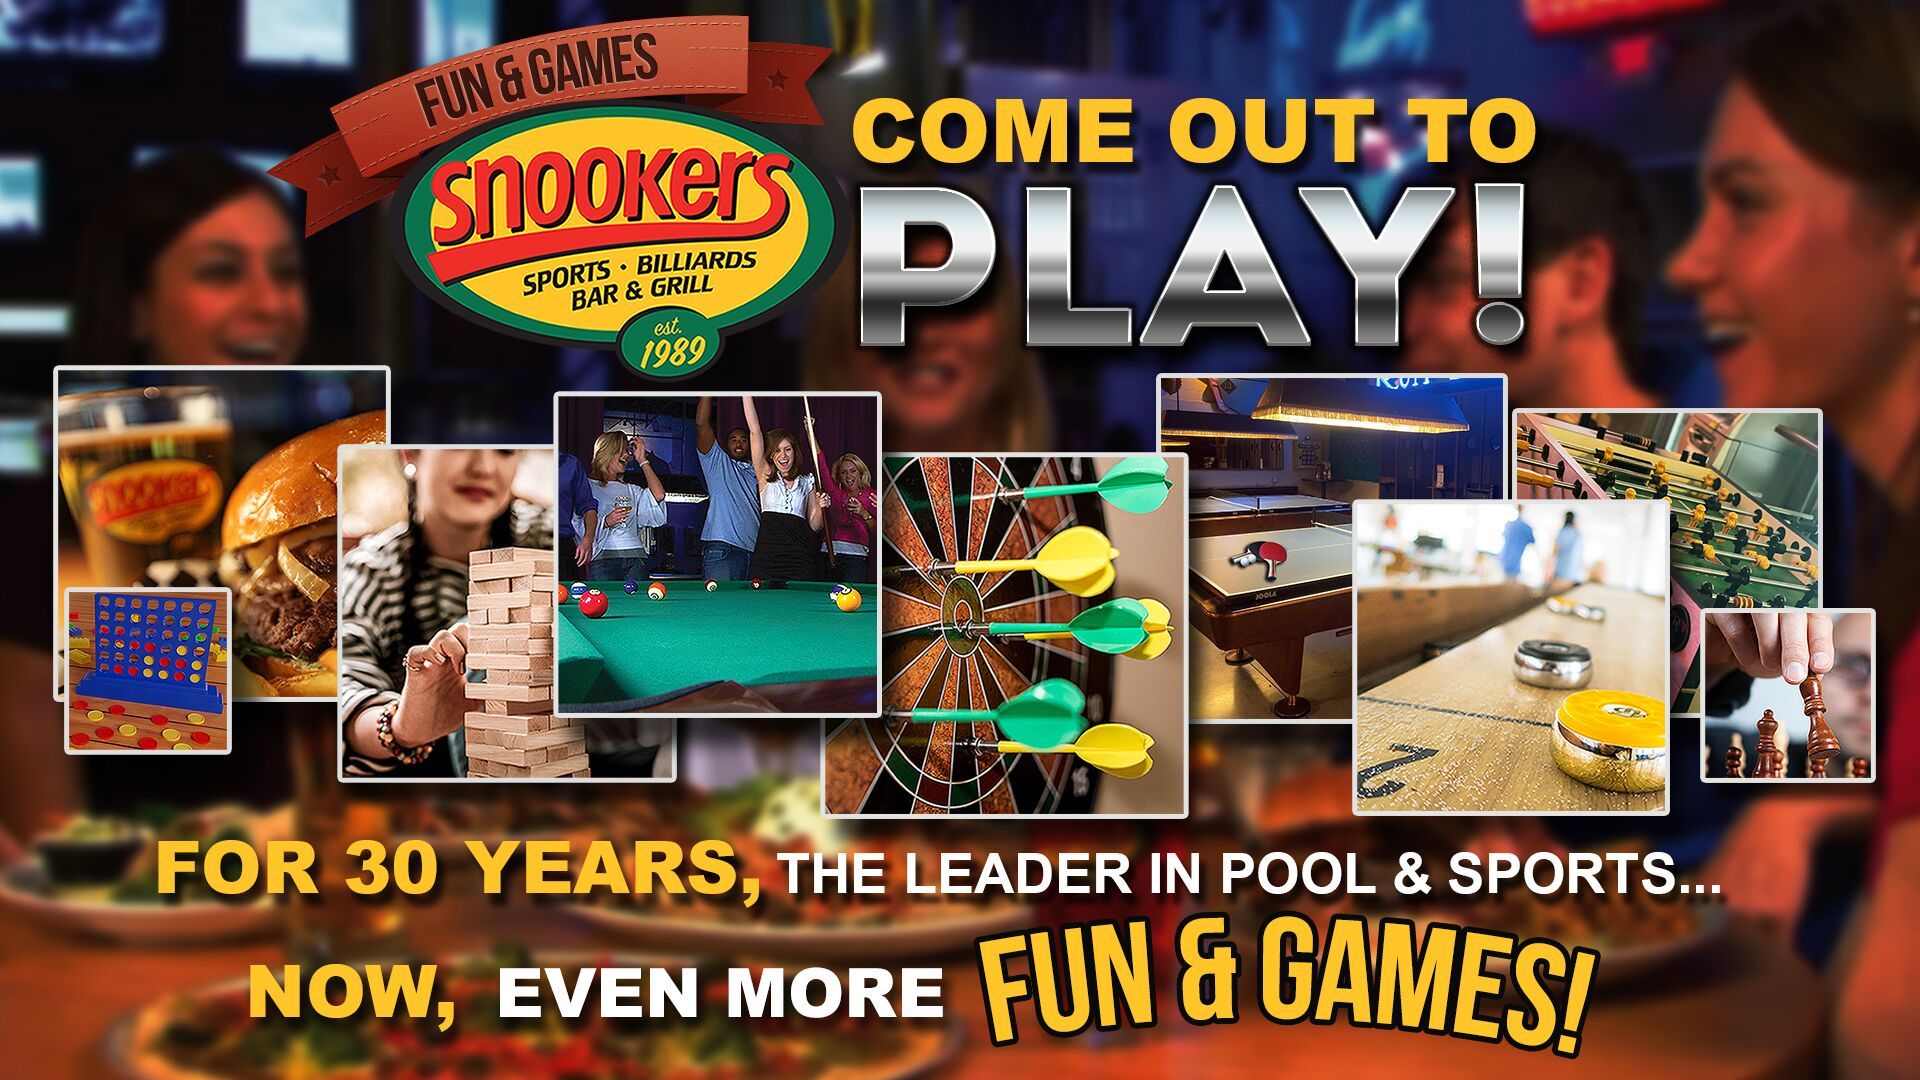 Snookers Sports, Billiards, Bar and Grill